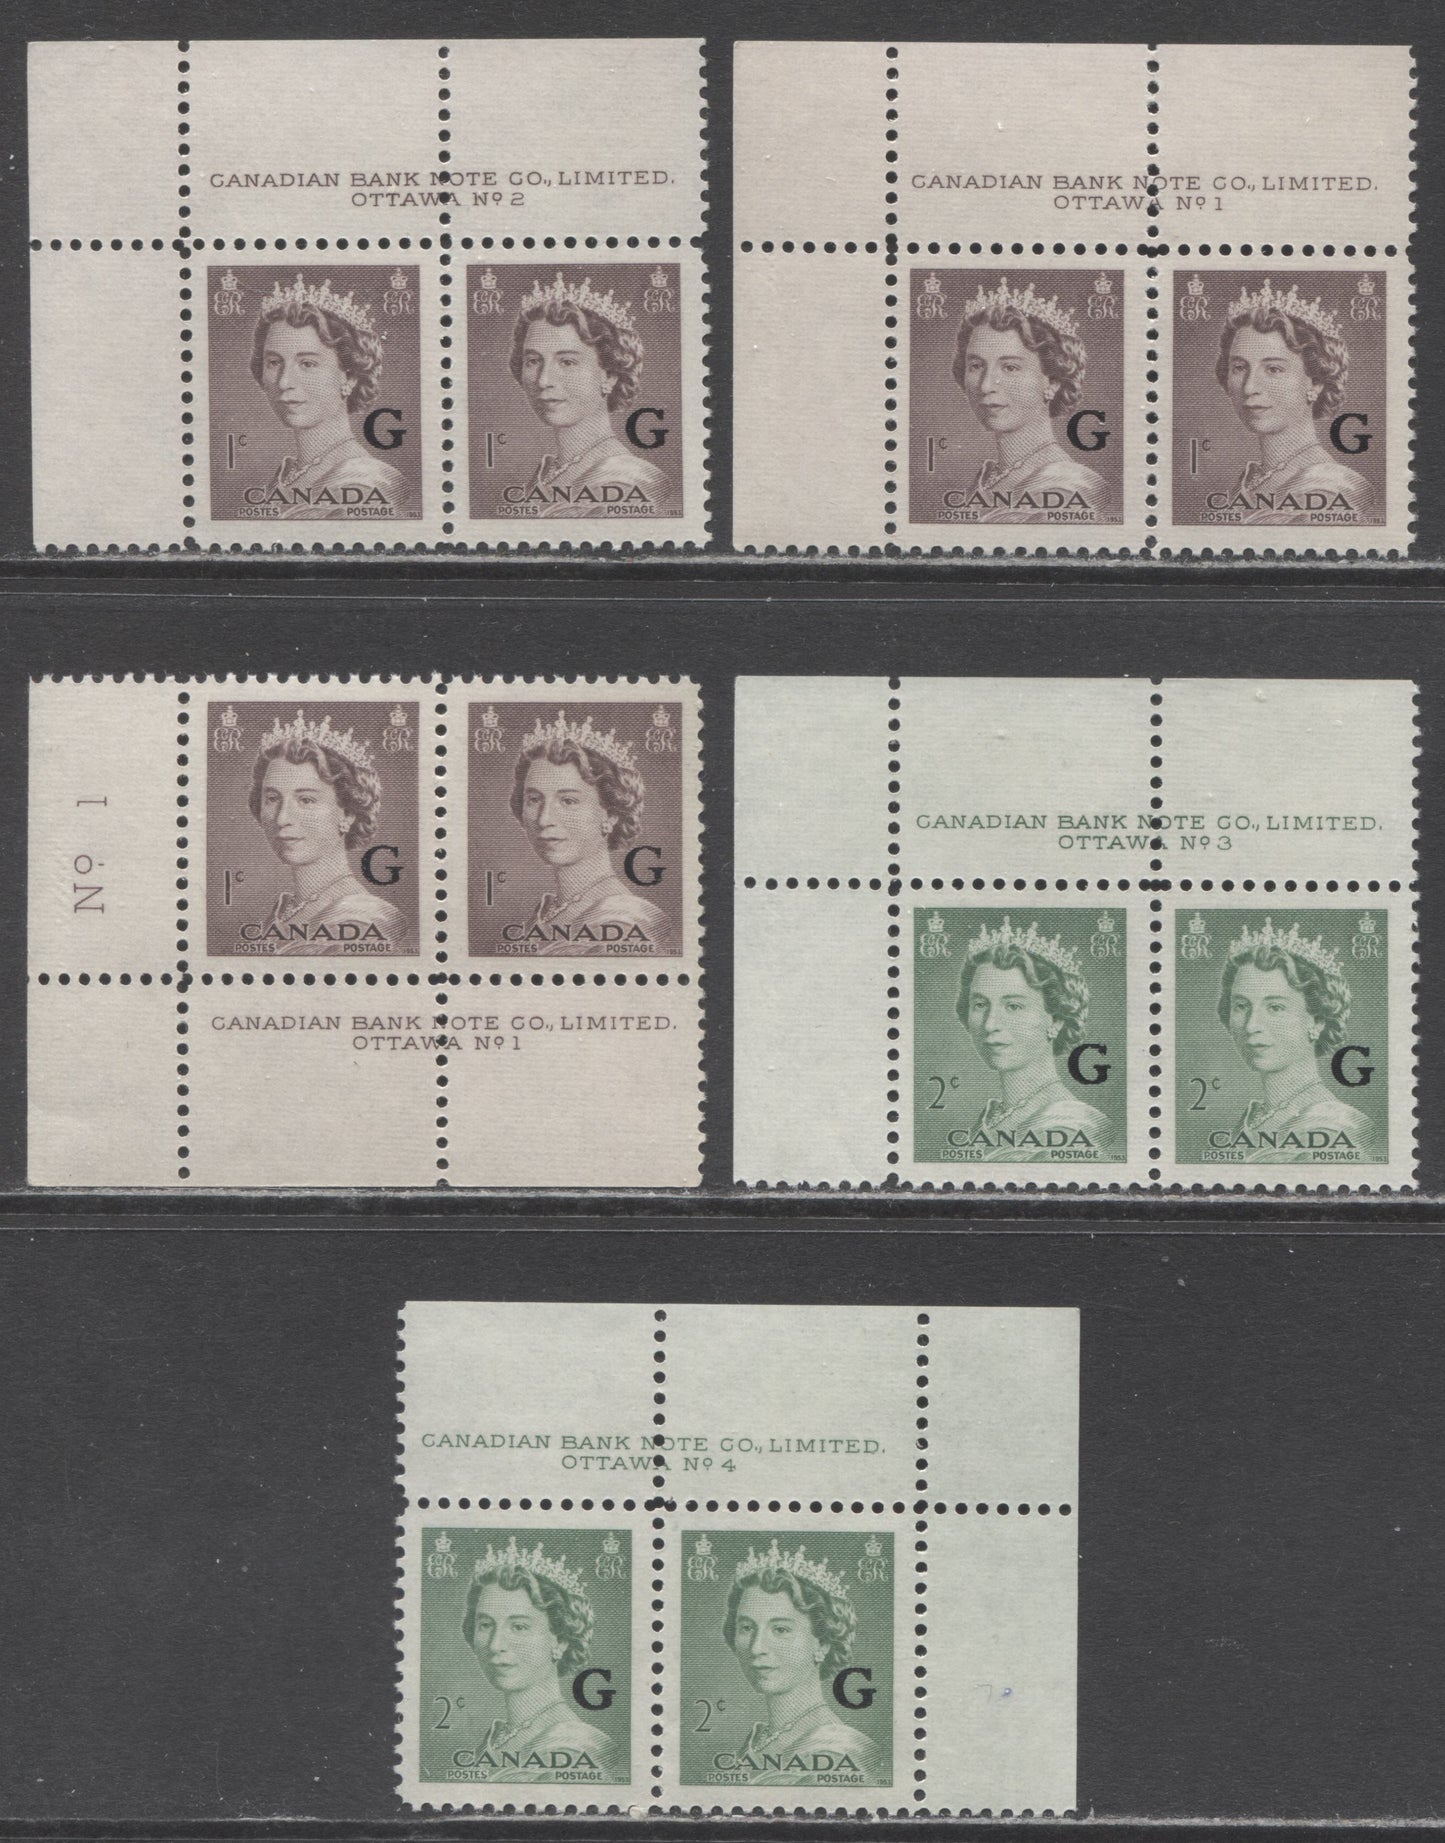 Lot 238 Canada #O33-O34 1c-2c Violet Brown & Pale Green Queen Elizabeth II, 1953-1954 Karsh Issue, 5 VFNH Plate 1-4 Inscription Pairs, Different Perfs